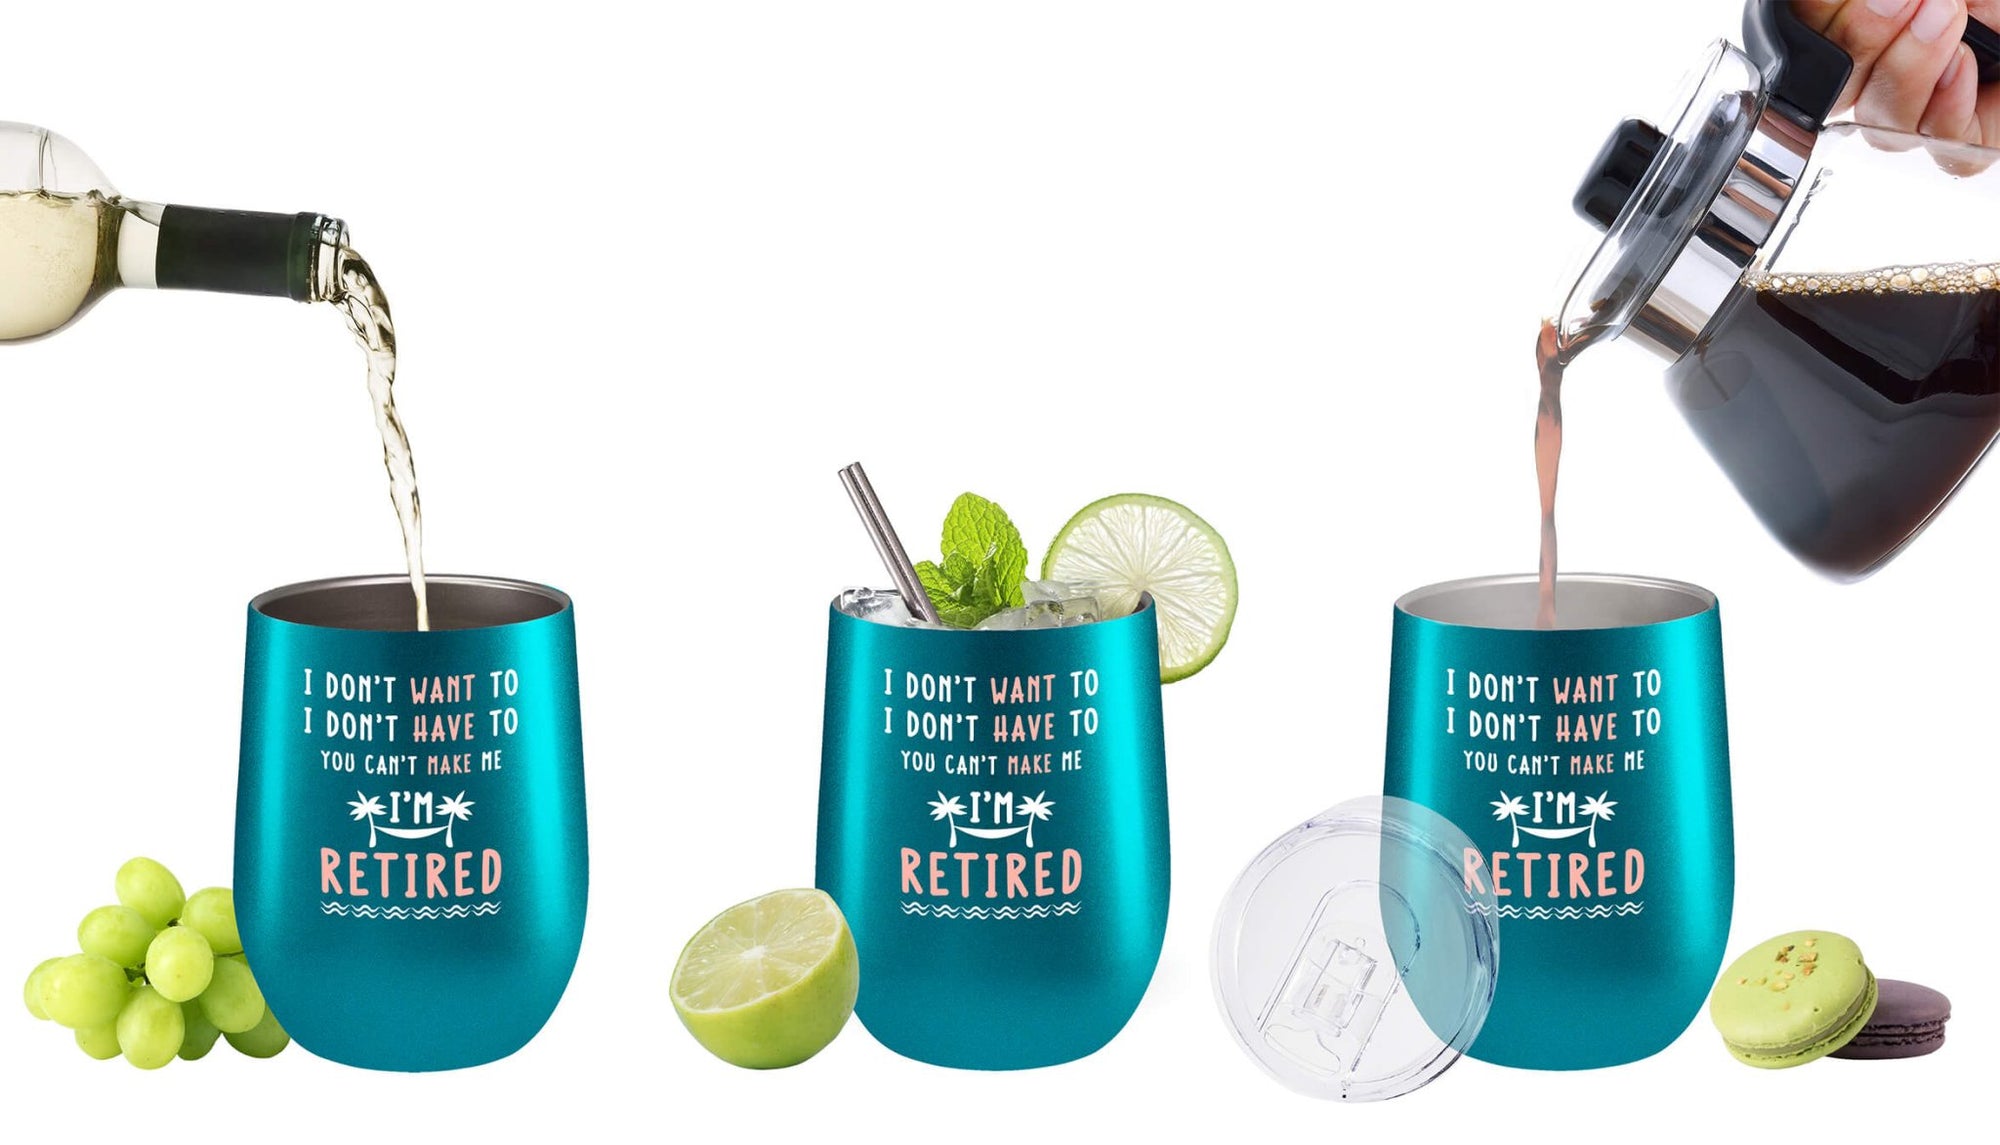 Women's Retirement Celebration Cup: 'I'm Retired' 12 oz Stainless Steel Tumbler - fancyfams